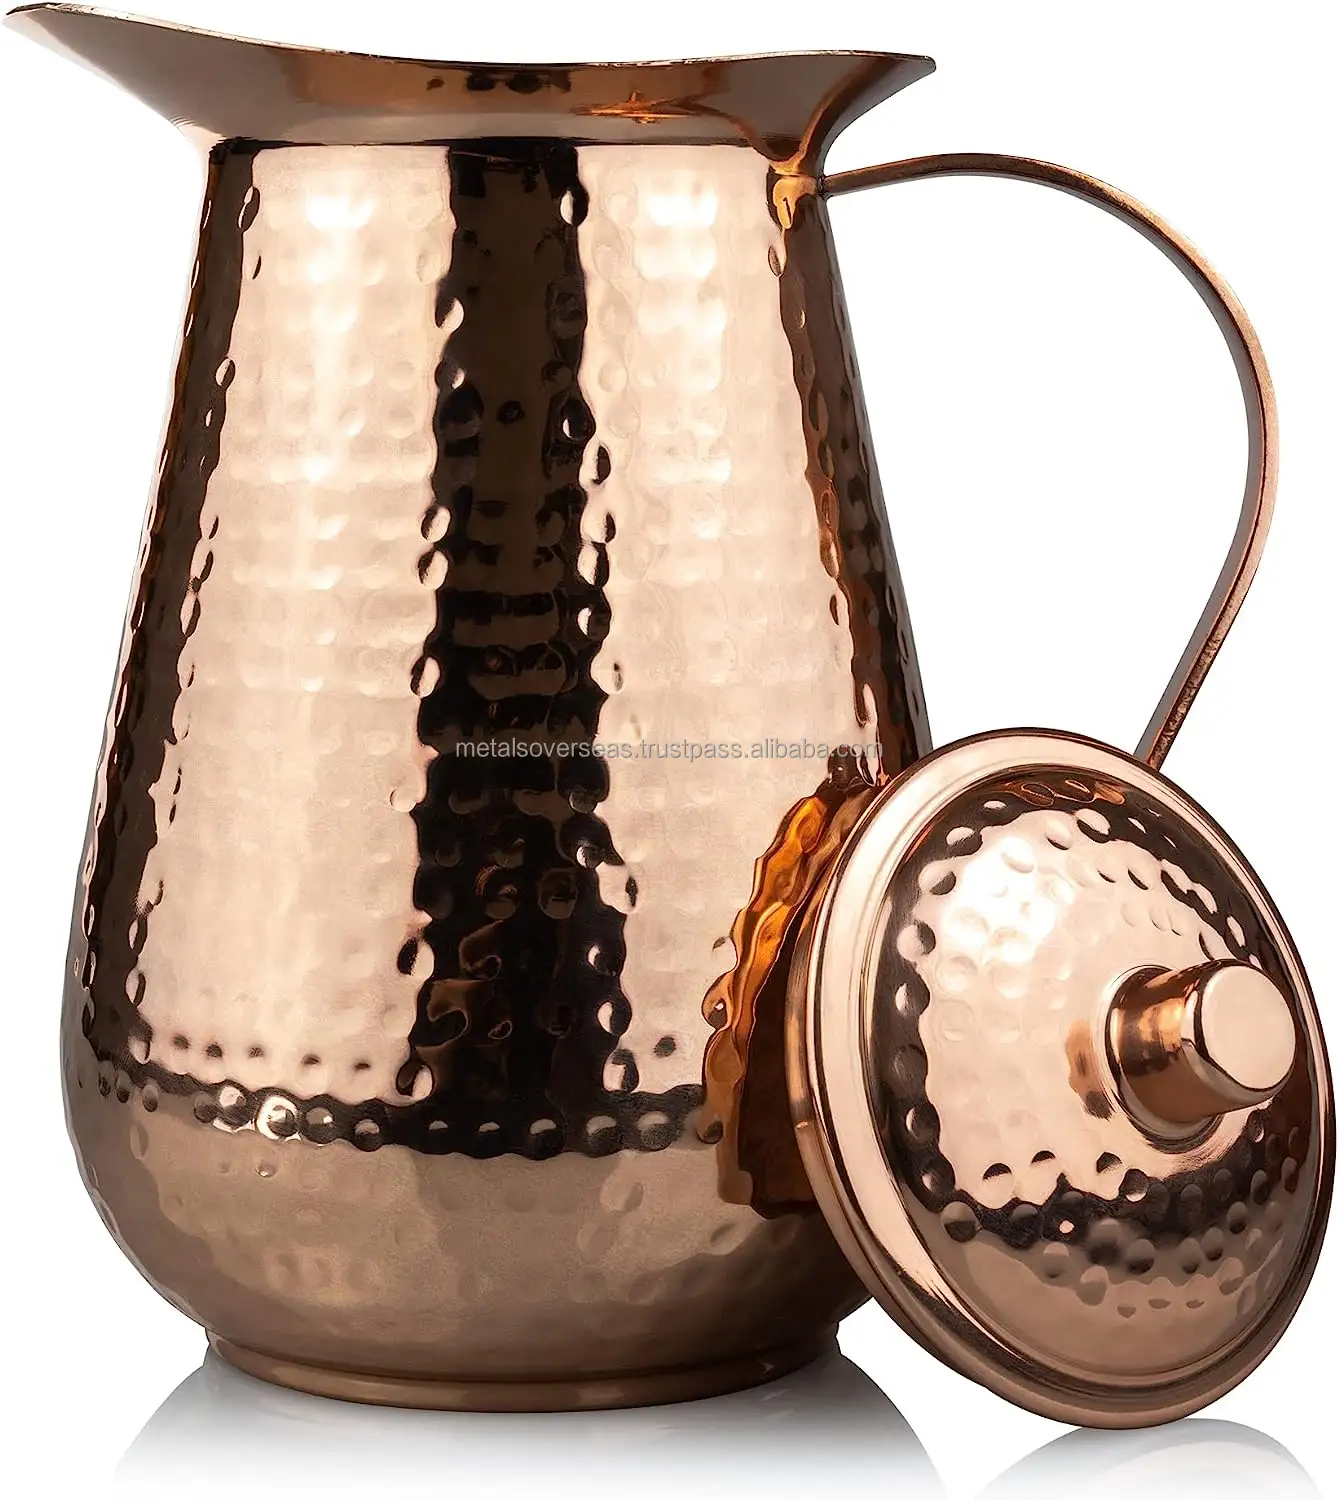 top seller Copper Pitcher With Lid 68 Oz Drink More Water, Lower Your Sugar Intake And Enjoy The Health Benefits